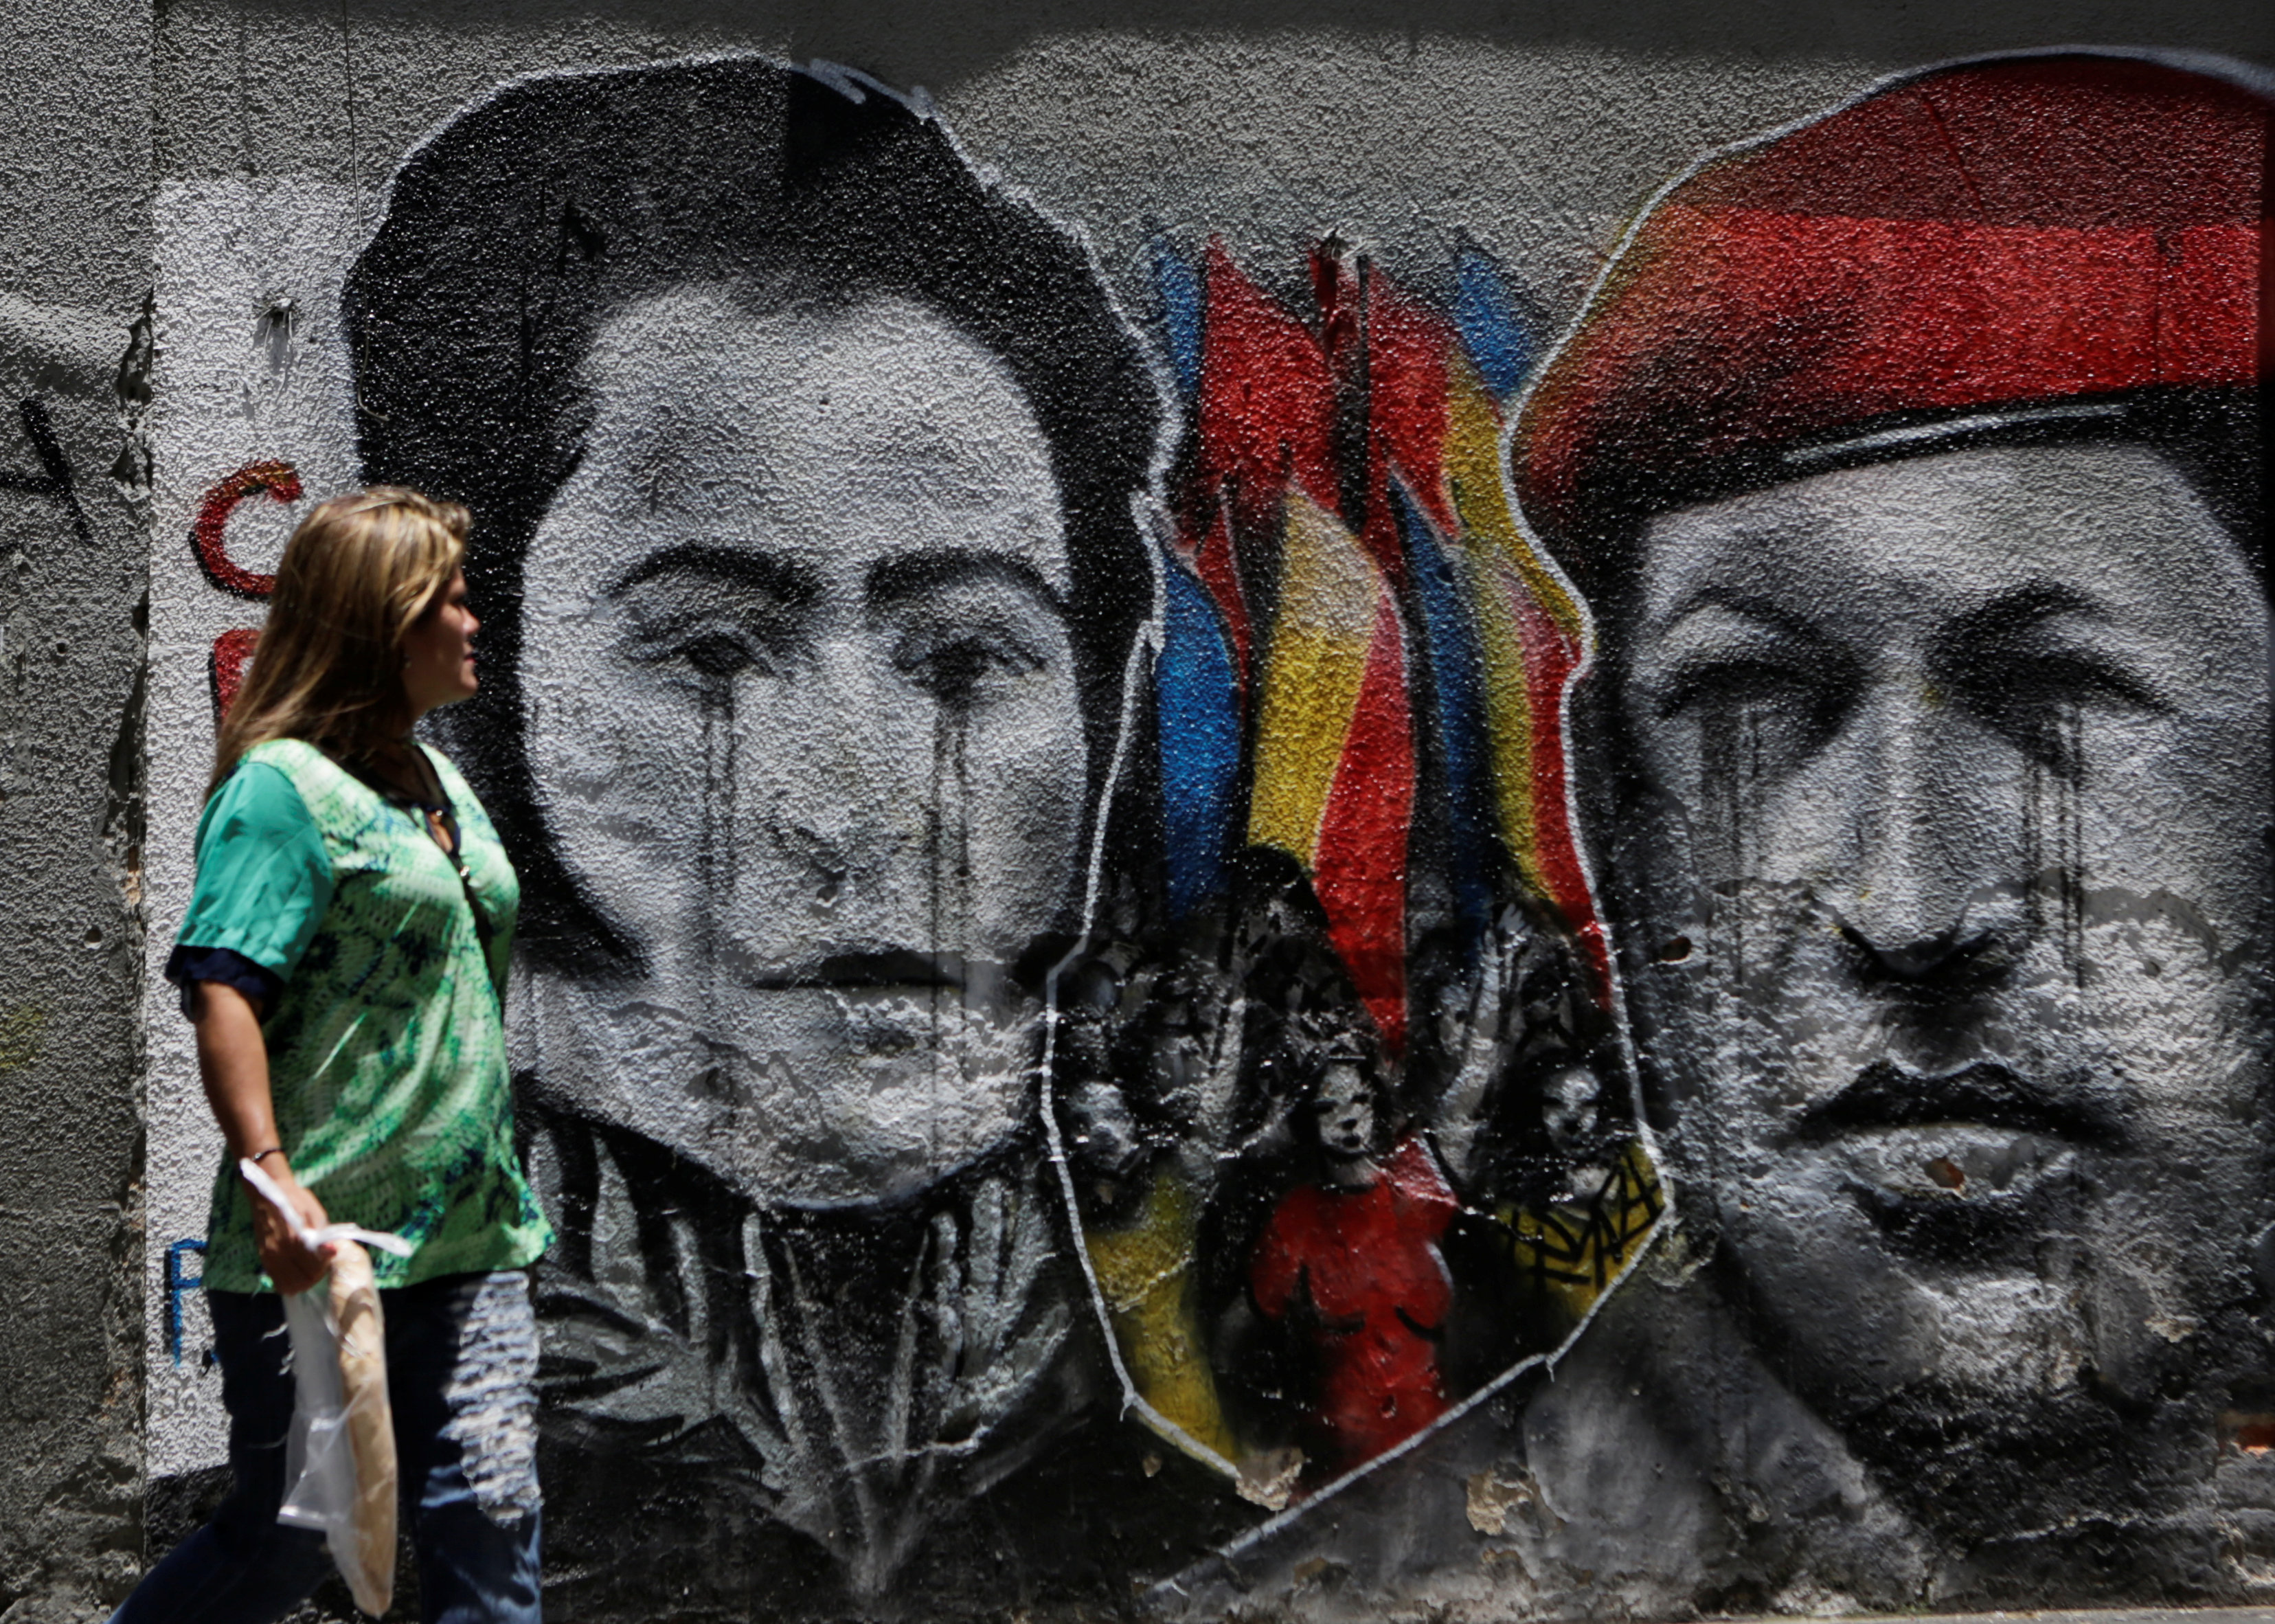 A woman looks at a mural depicting Venezuela's national hero Simon Bolivar (L) and Venezuela's late president Hugo Chavez in downtown Caracas, Venezuela September 18, 2016. REUTERS/Henry Romero FOR EDITORIAL USE ONLY. NO RESALES. NO ARCHIVES.